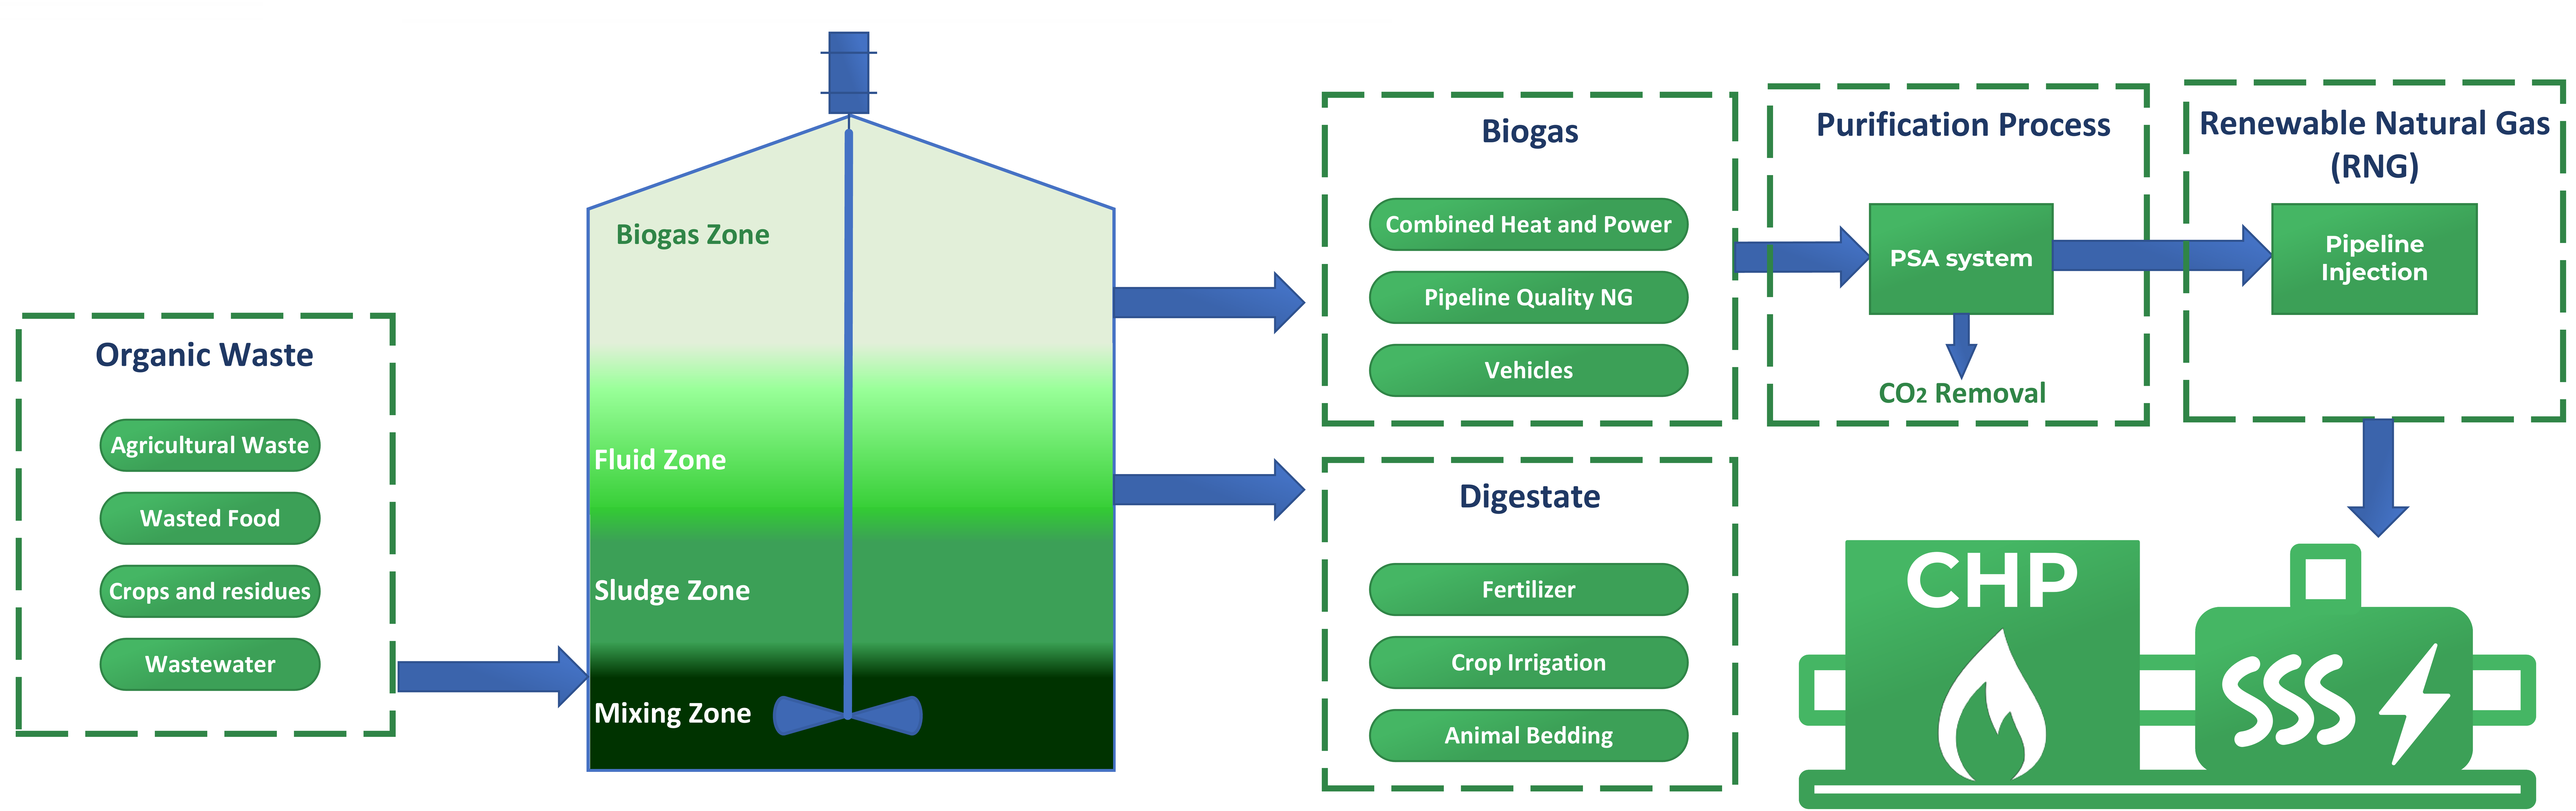 Combined Heat and Power (CHP) Biogas Renewable Natural Gas or RNG Anaerobic Digestion Process for Pipline injection